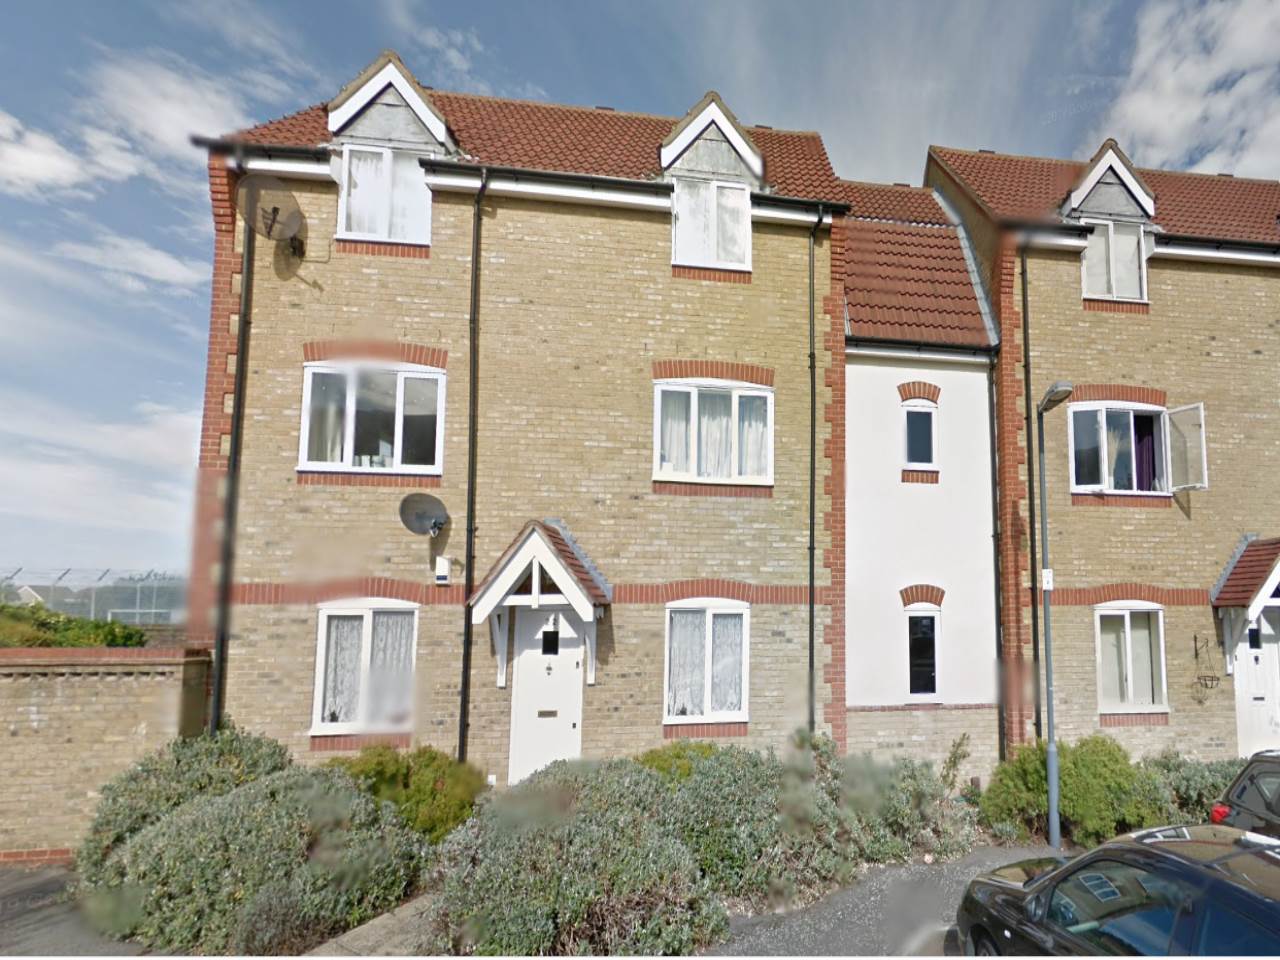 2 bed flat to rent in Chadwell Heath, Romford, RM6 